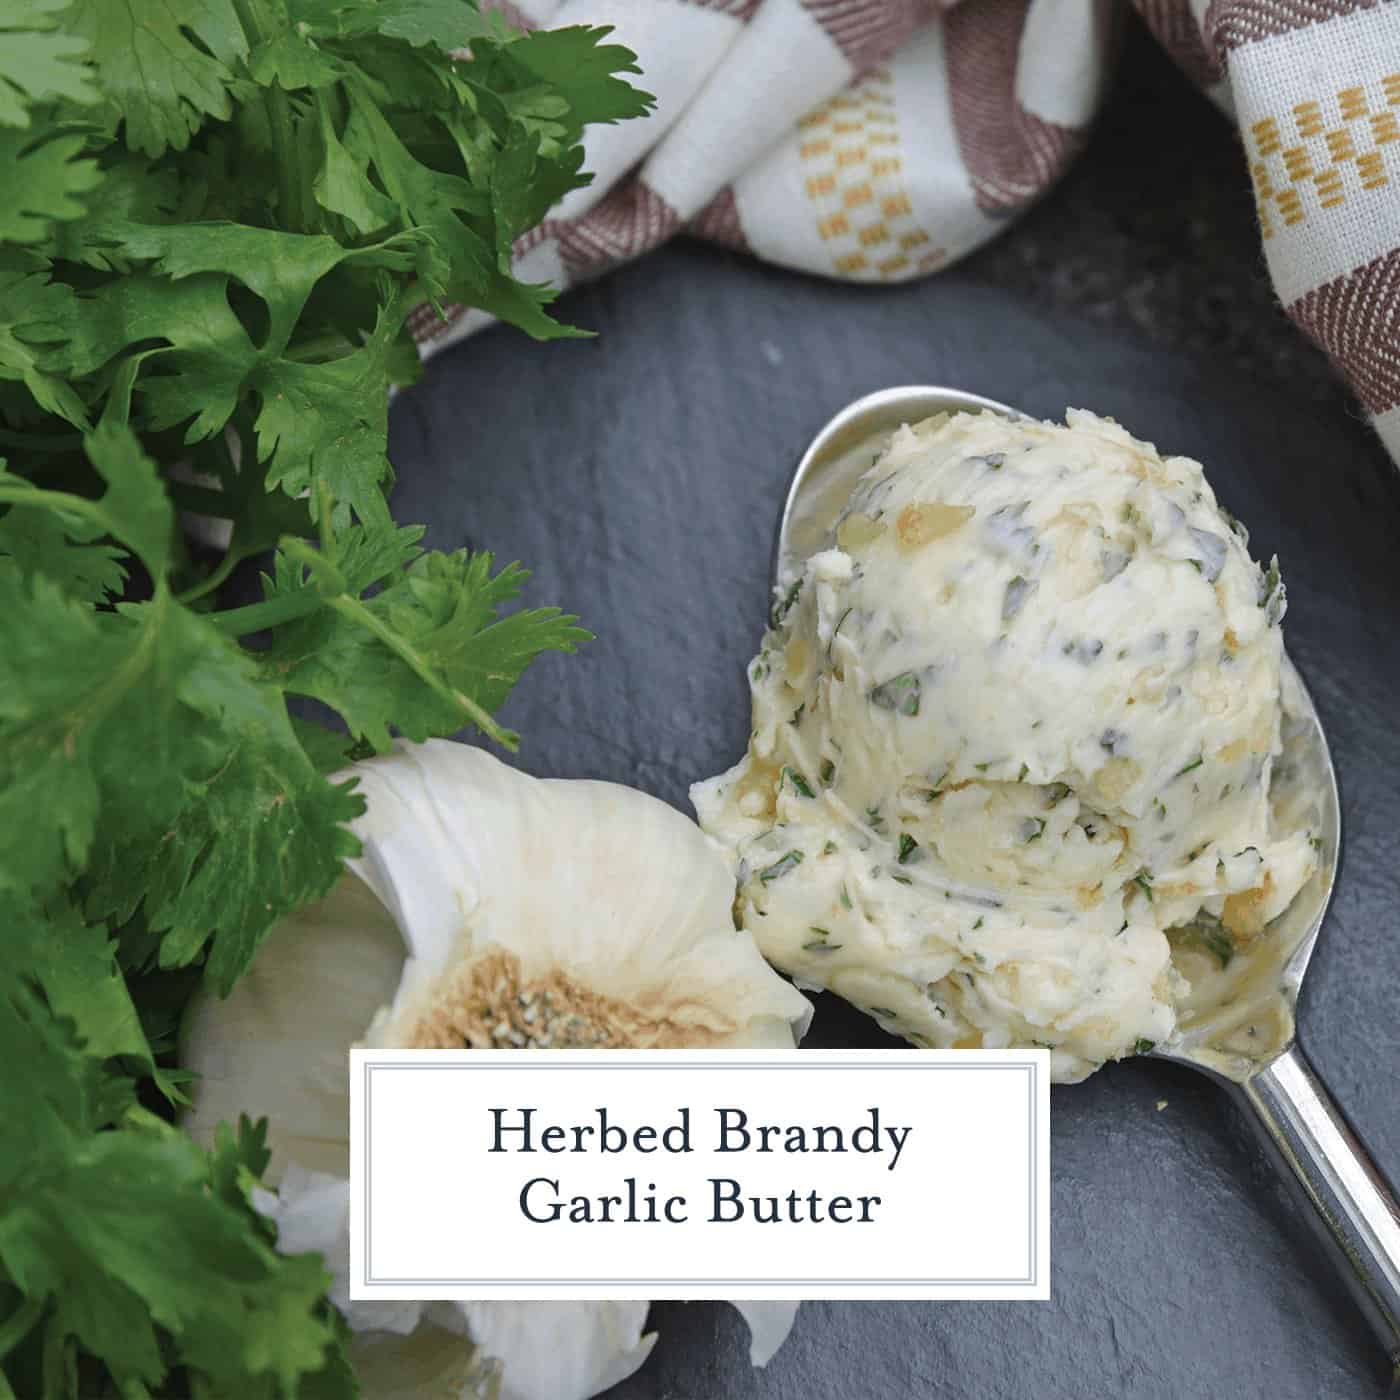 Brandy Garlic Butter is the best homemade garlic butter ever! Easy to make and SO yummy on garlic butter steak! #garlicbutter #howtomakegarlicbutter www.savoryexperiments.com